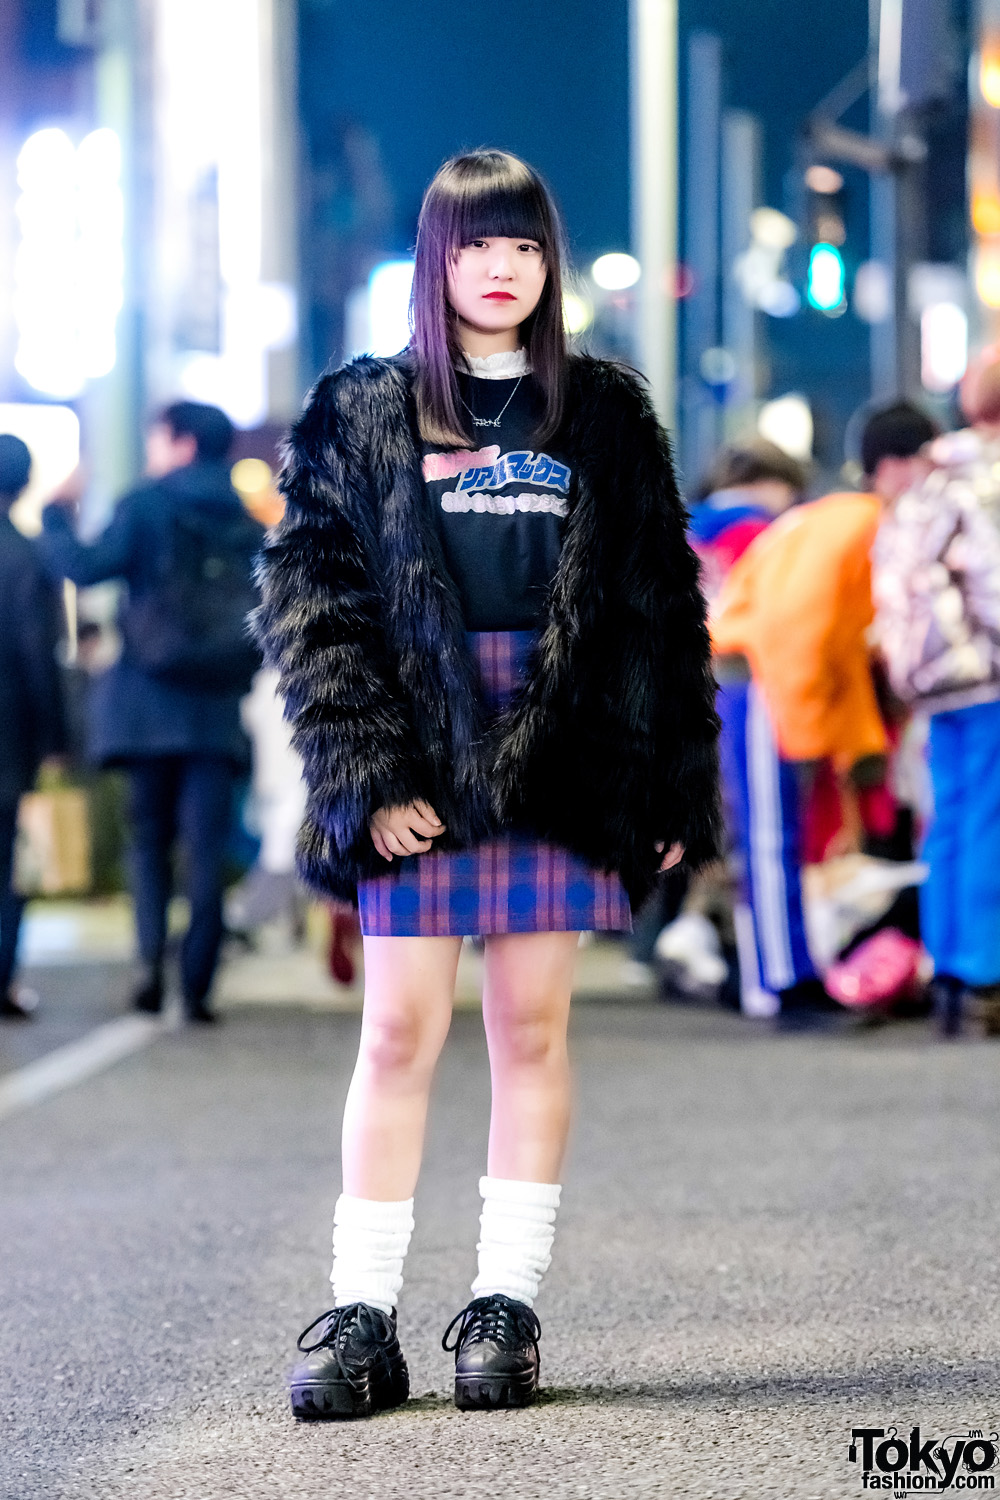 Harajuku Girl in H&M Faux Fur Jacket, 7% More Pink Plaid Skirt & Oh Pearl Necklace